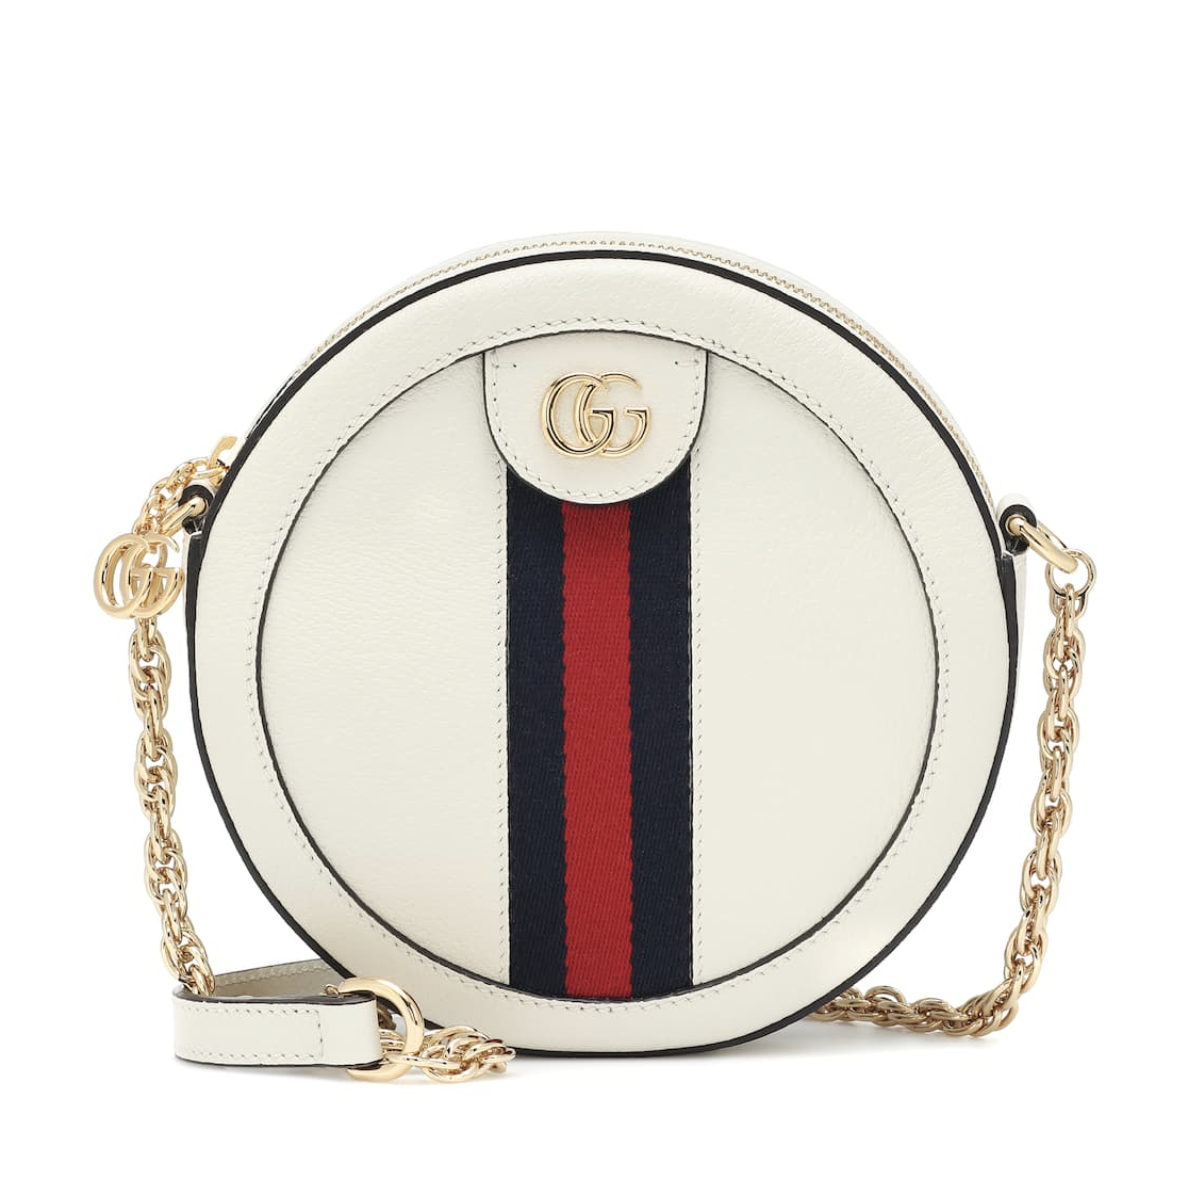 GUCCI Ophidia Mini Round leather shoulder bag